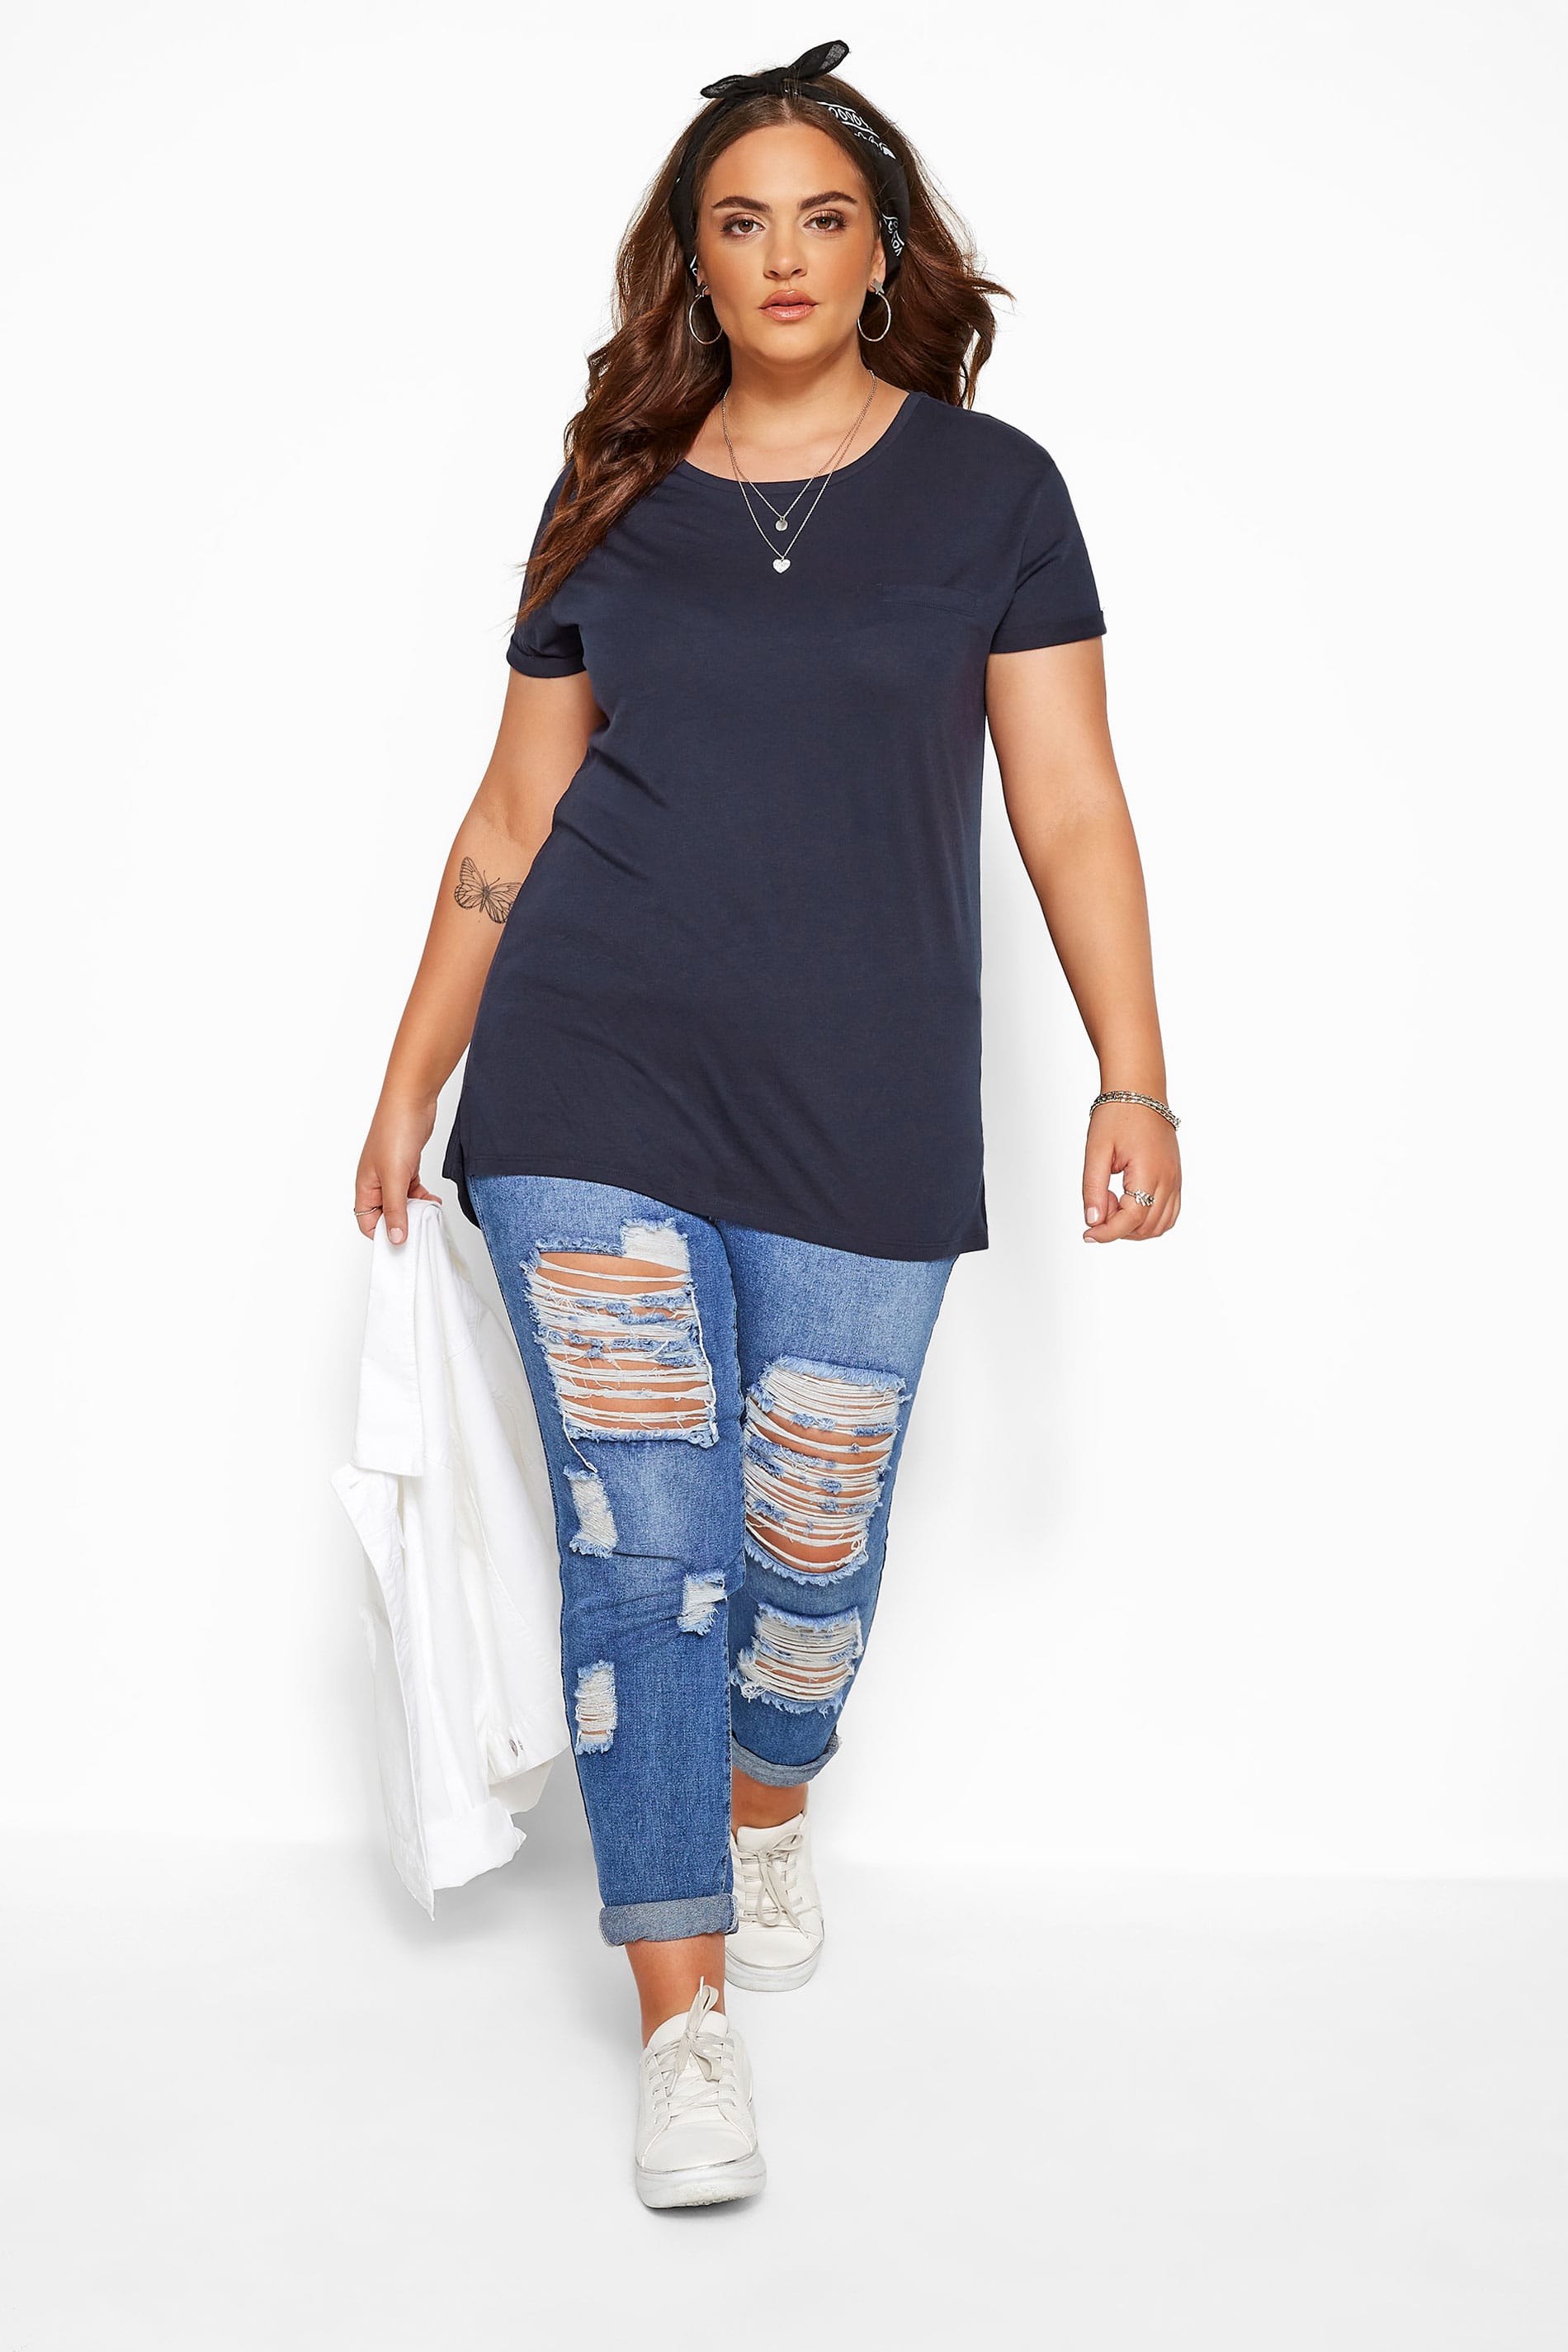 Grande taille  Tops Grande taille  T-Shirts | T-Shirt Bleu Marine Col Rond - SX19738